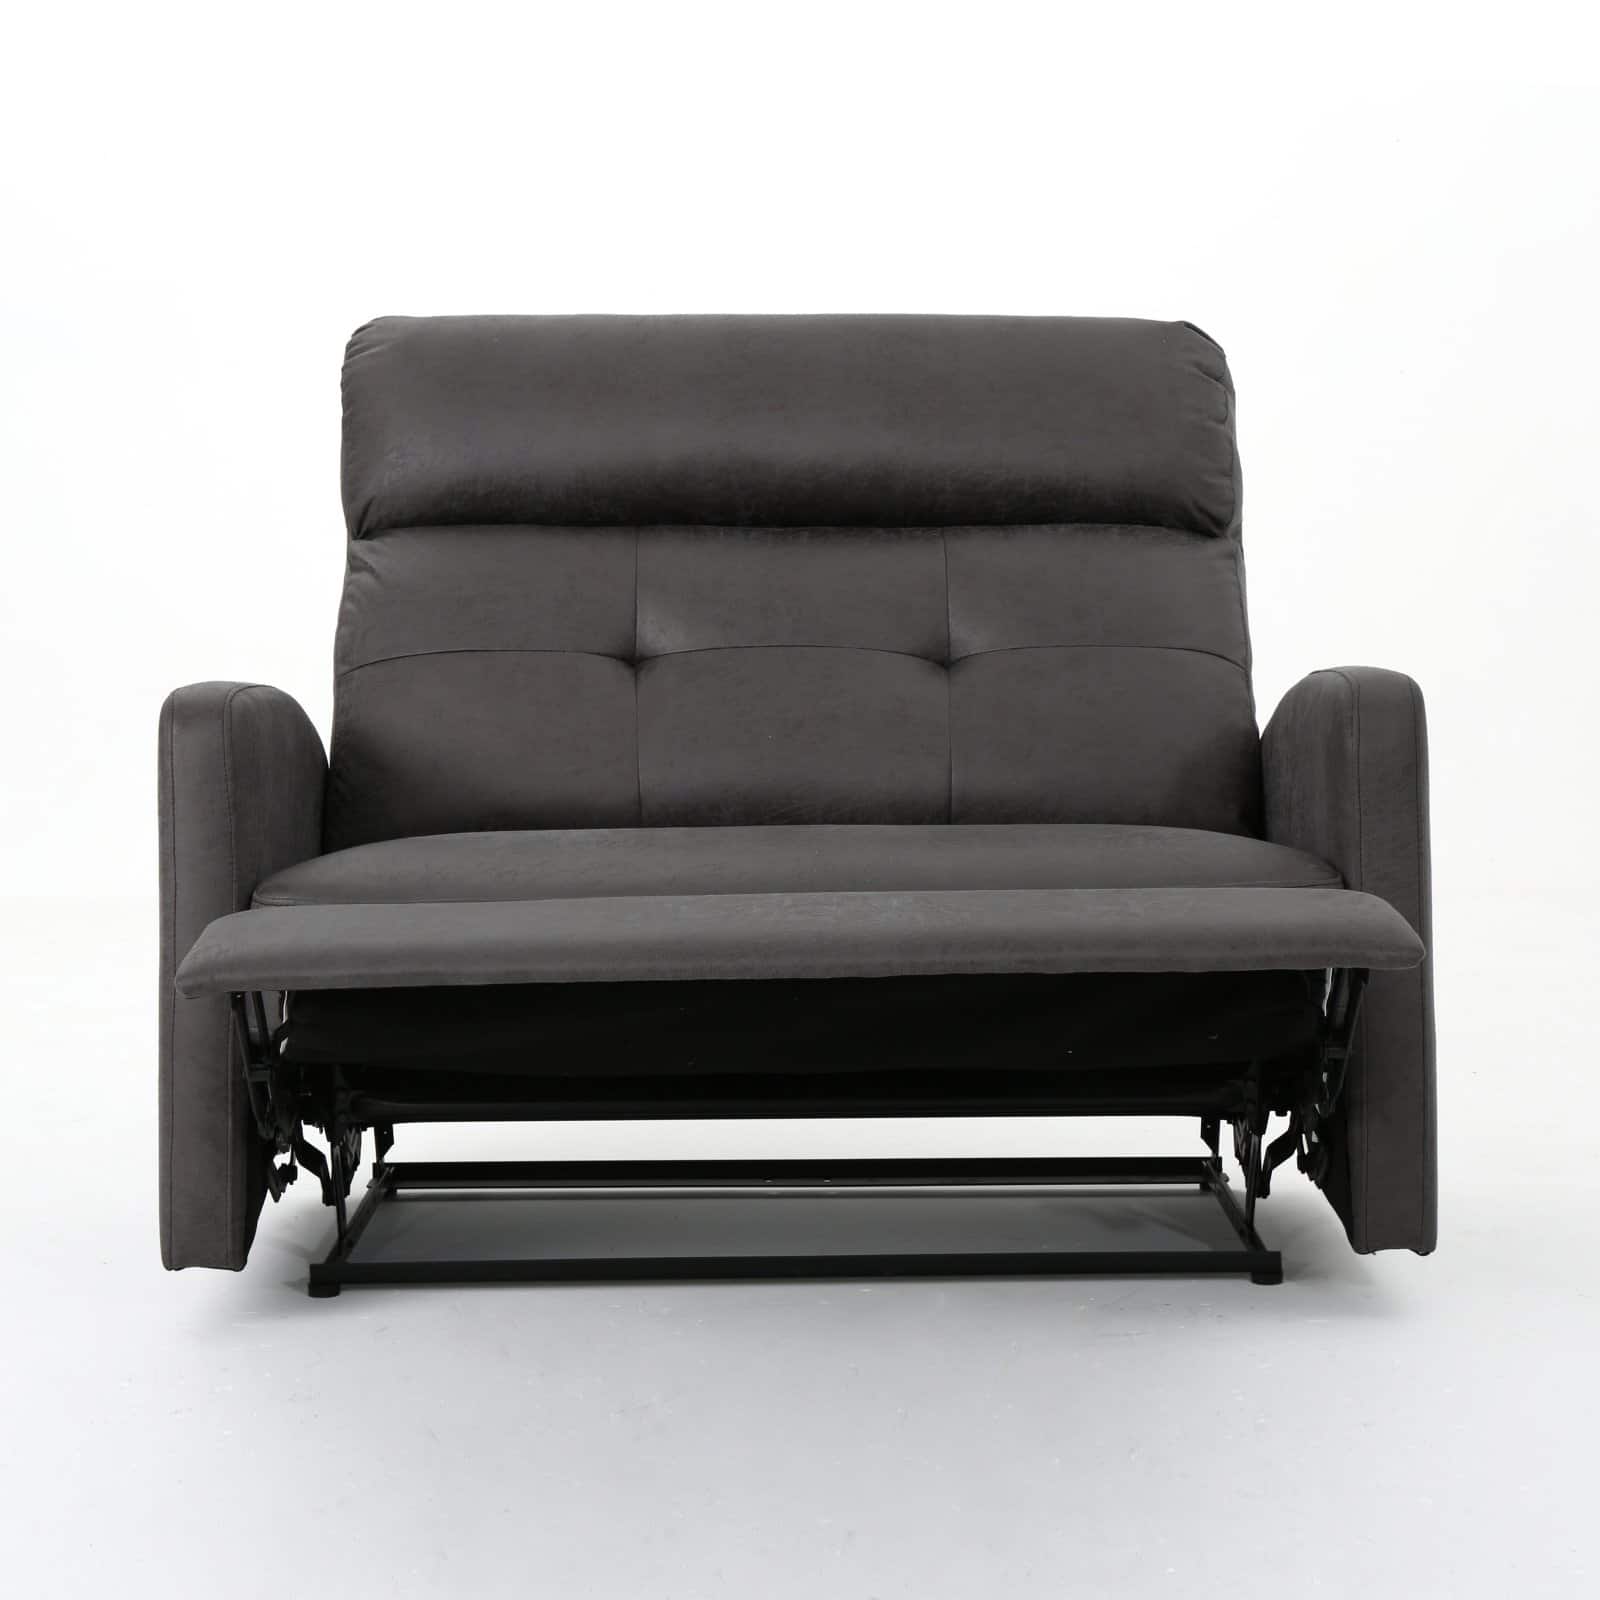 Halima Tufted 2 Seater Recliner - image 5 of 10